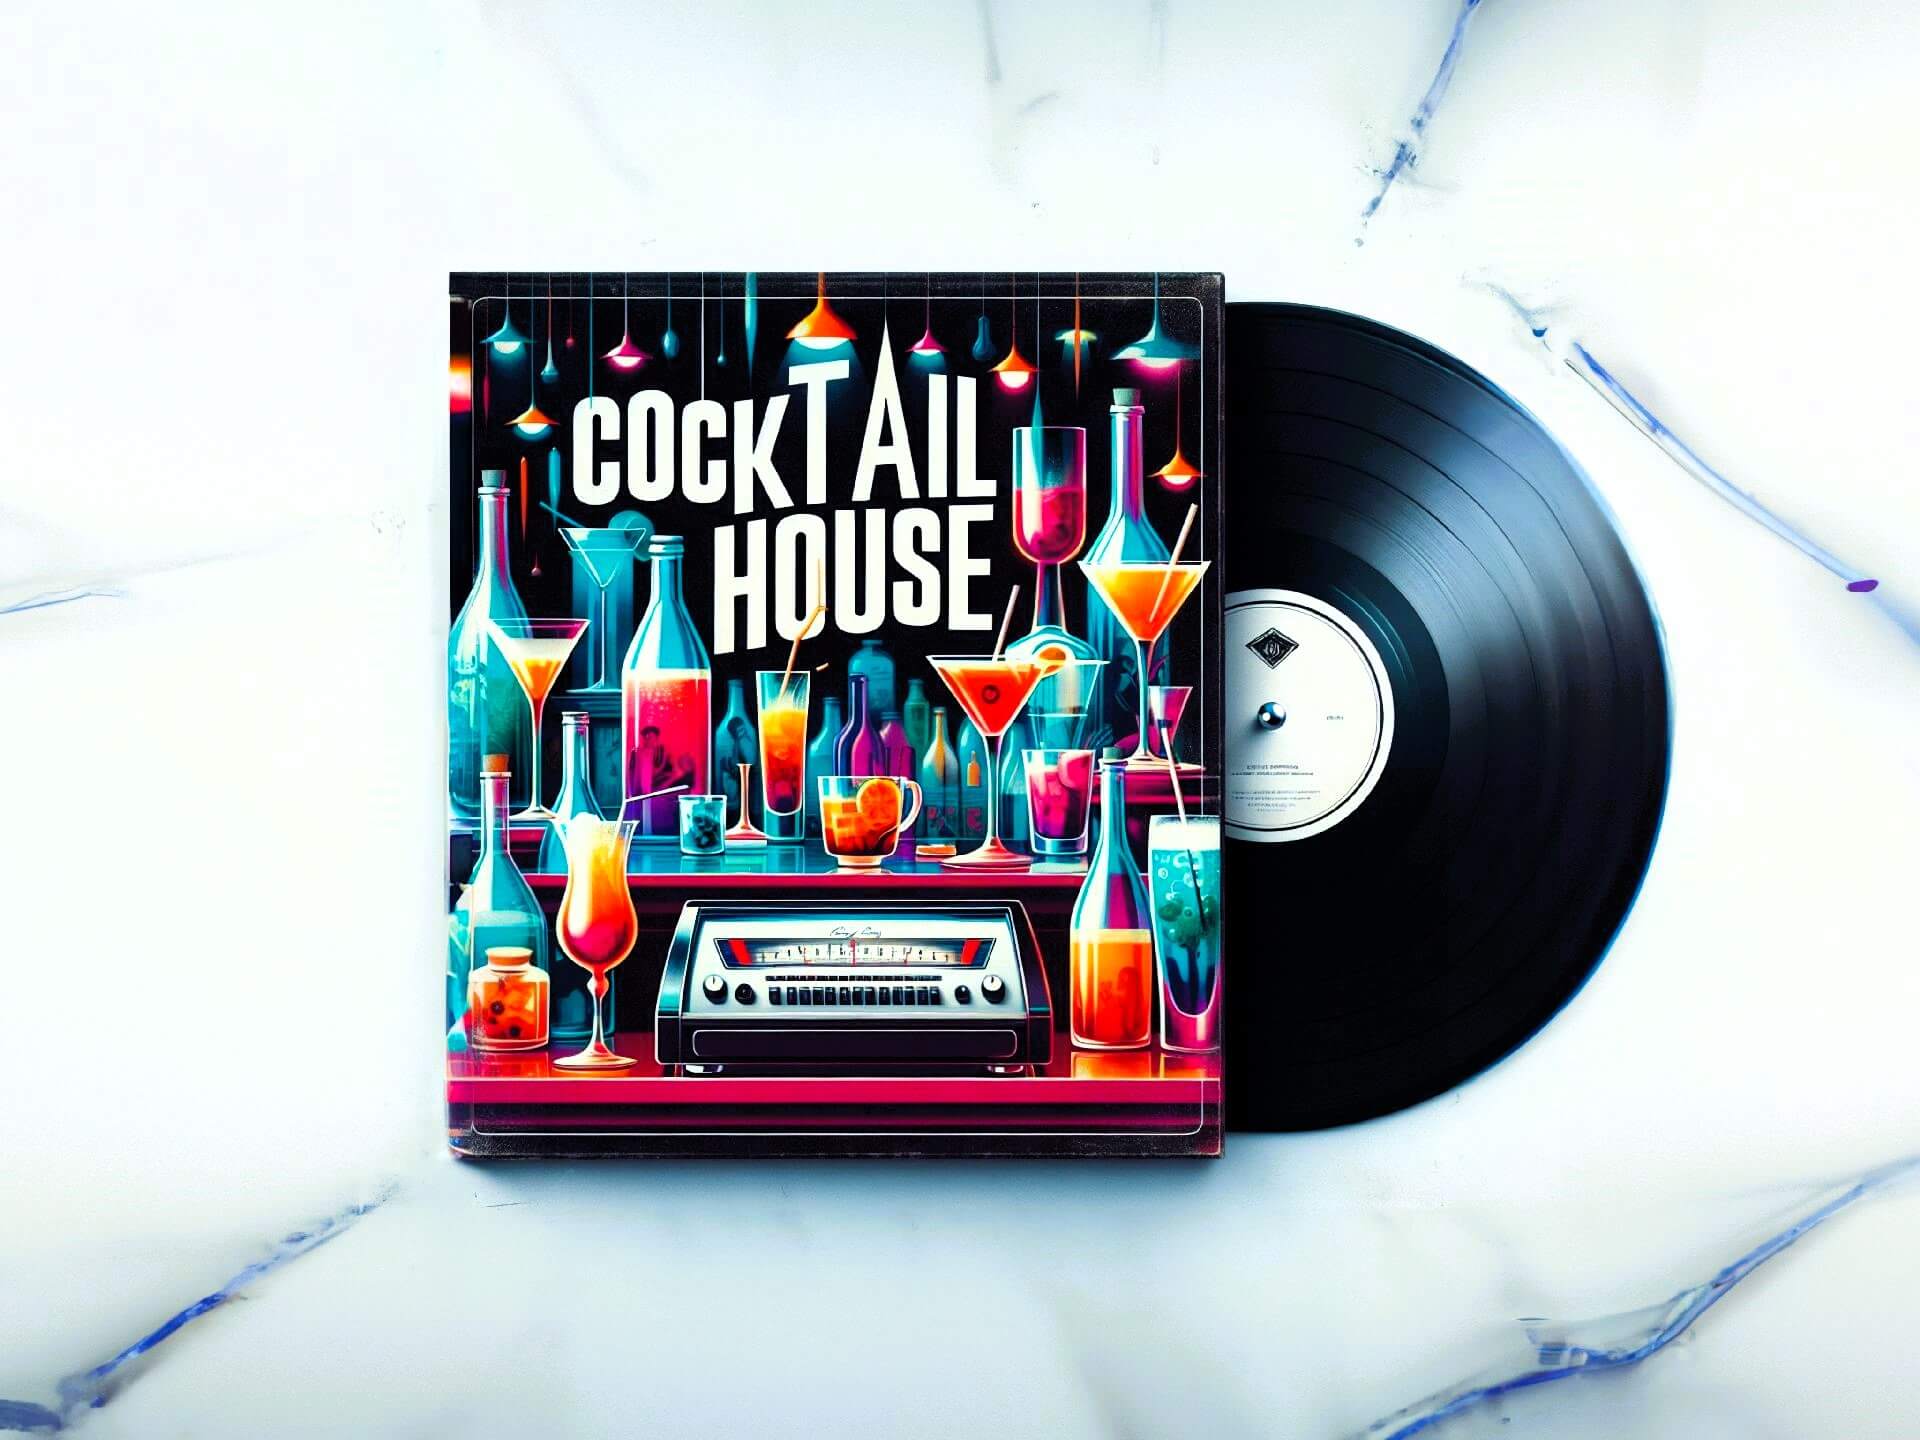 AI-generated image of a record album cover that reads "Cocktail House"